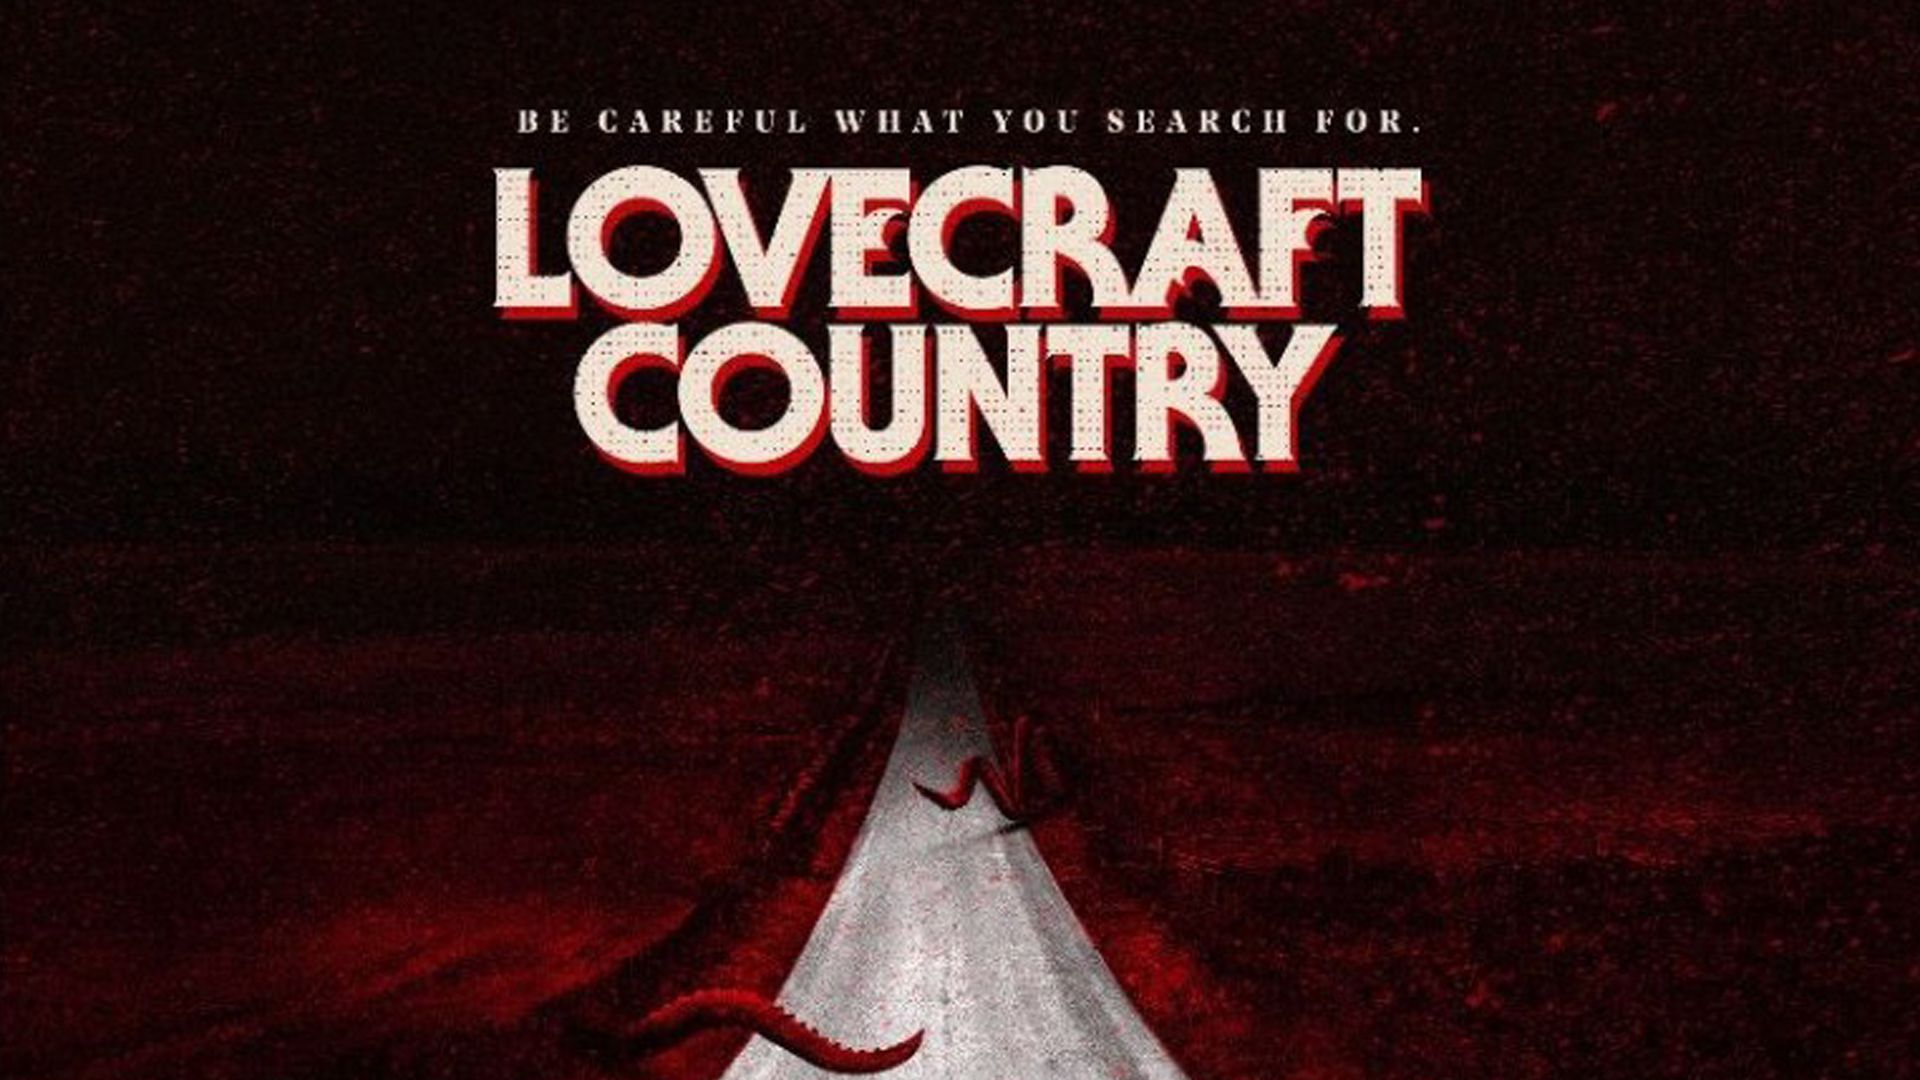 HBO series 'Lovecraft Country', partially filmed in Mount Morris